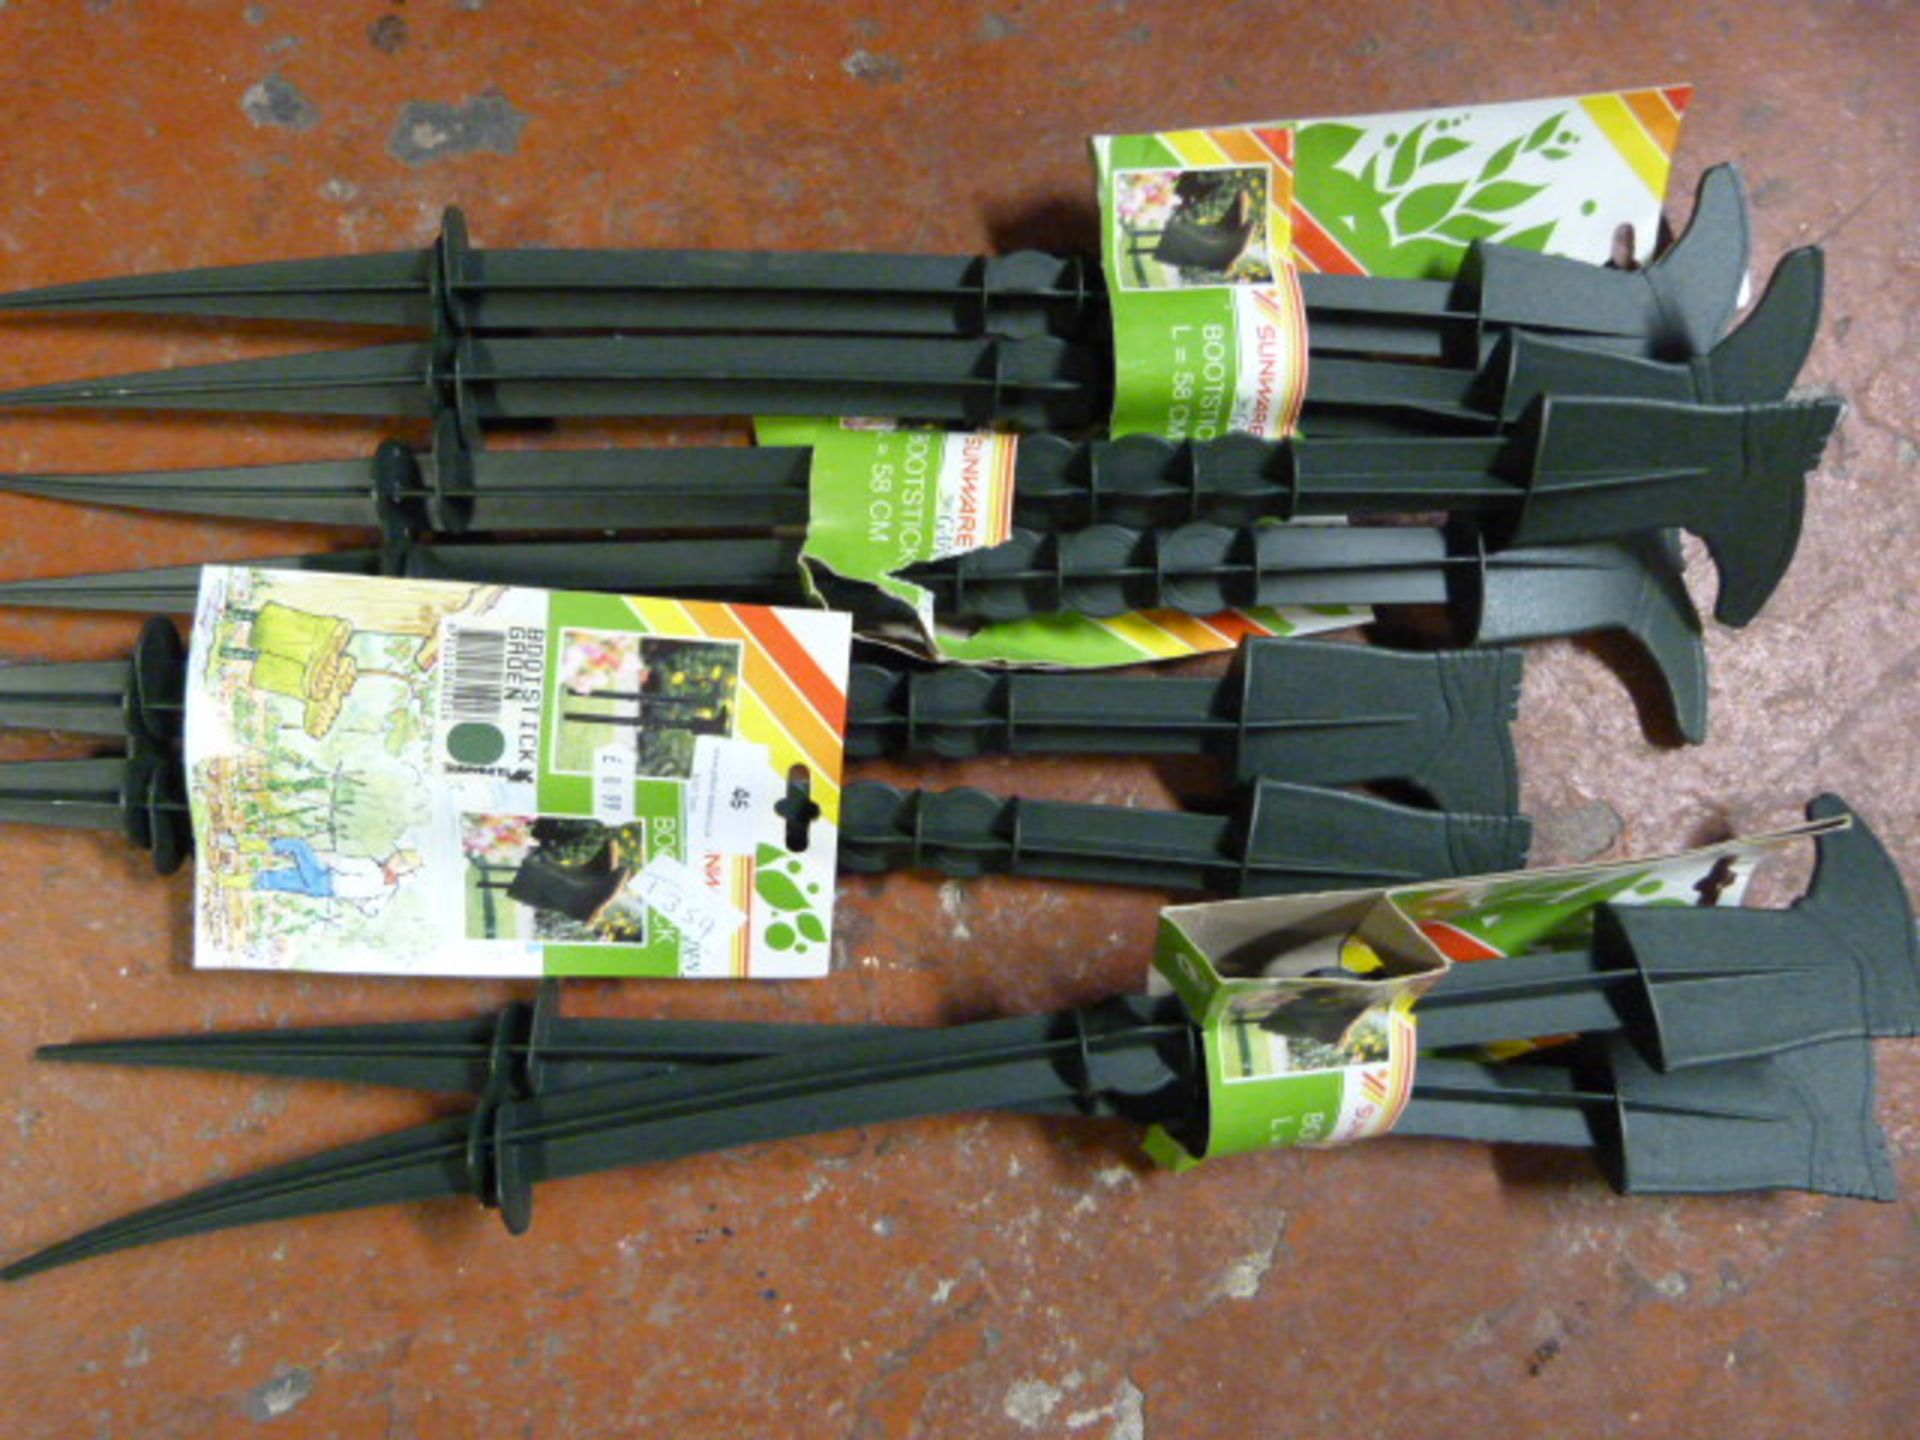 Four packs of Two Boot Sticks